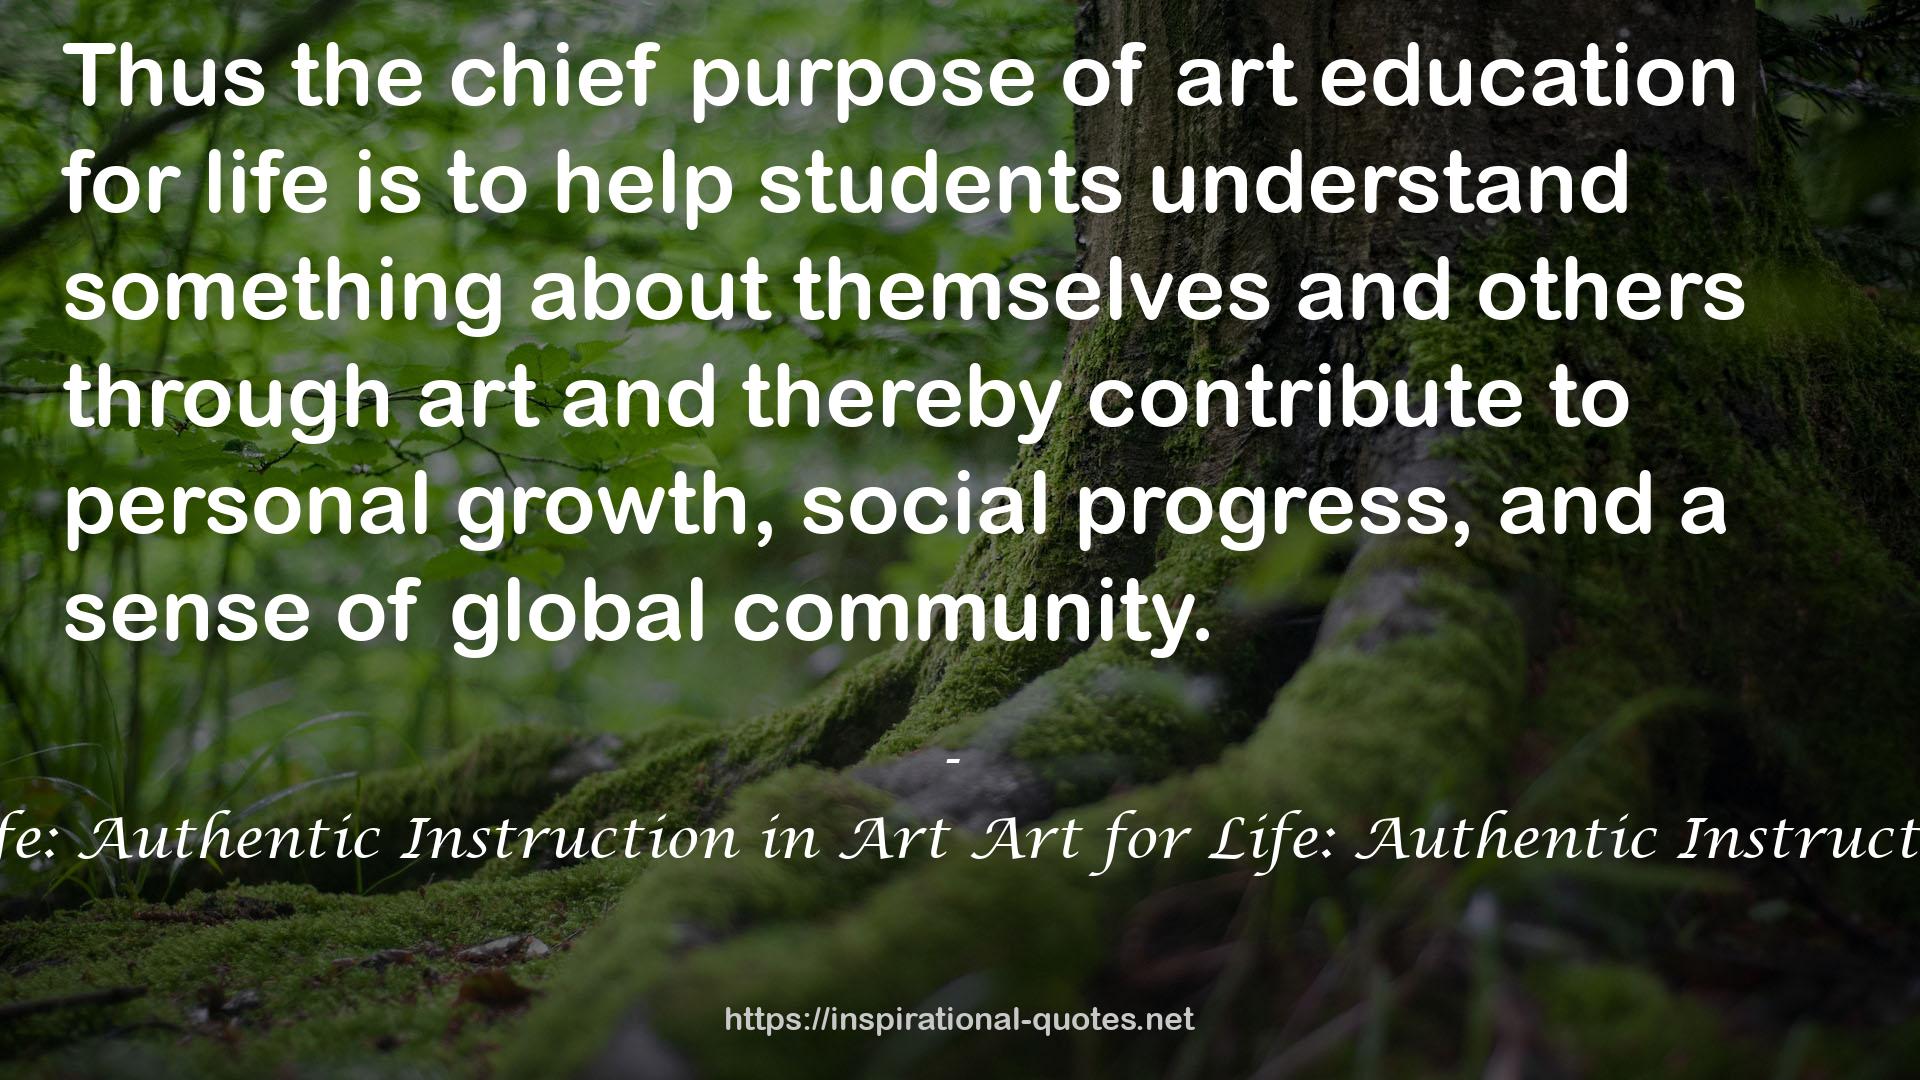 Art for Life: Authentic Instruction in Art Art for Life: Authentic Instruction in Art QUOTES